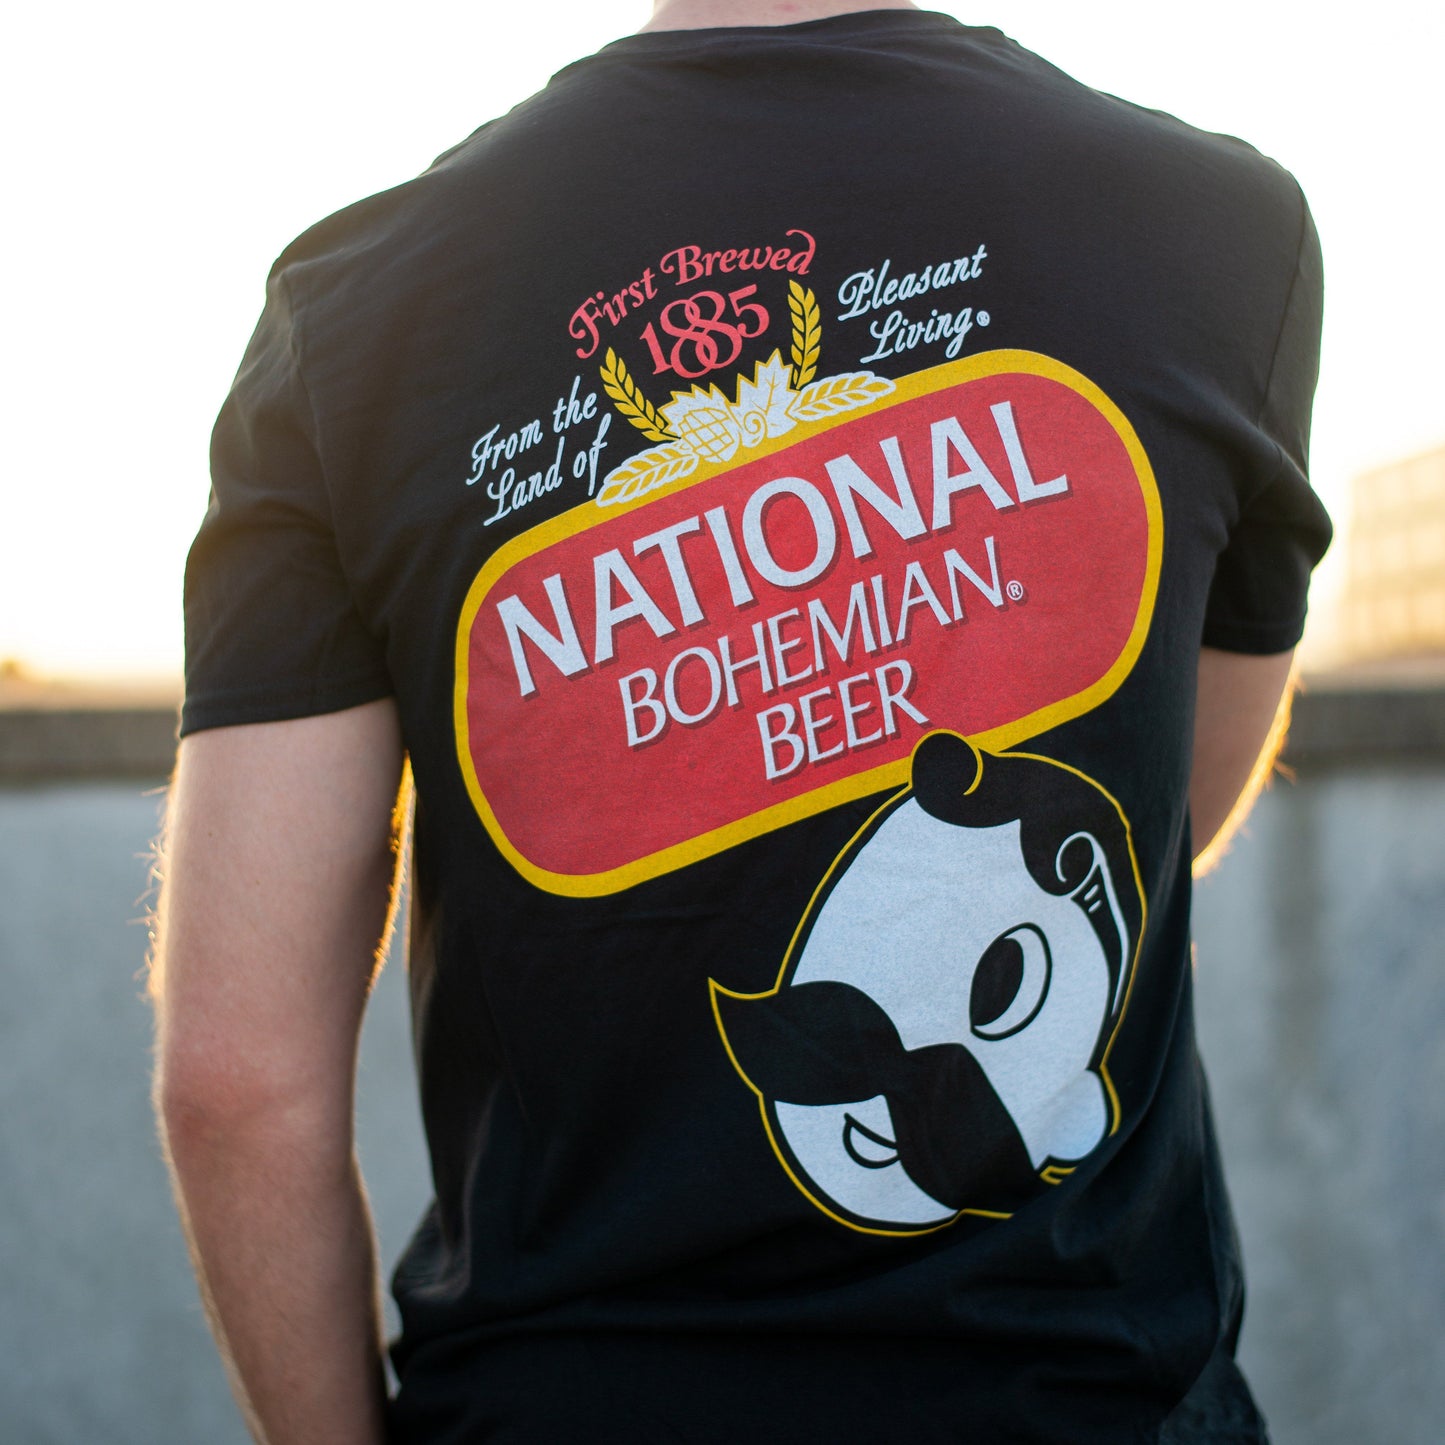 National Bohemian Beer Signature Classic (Black) / Shirt - Route One Apparel